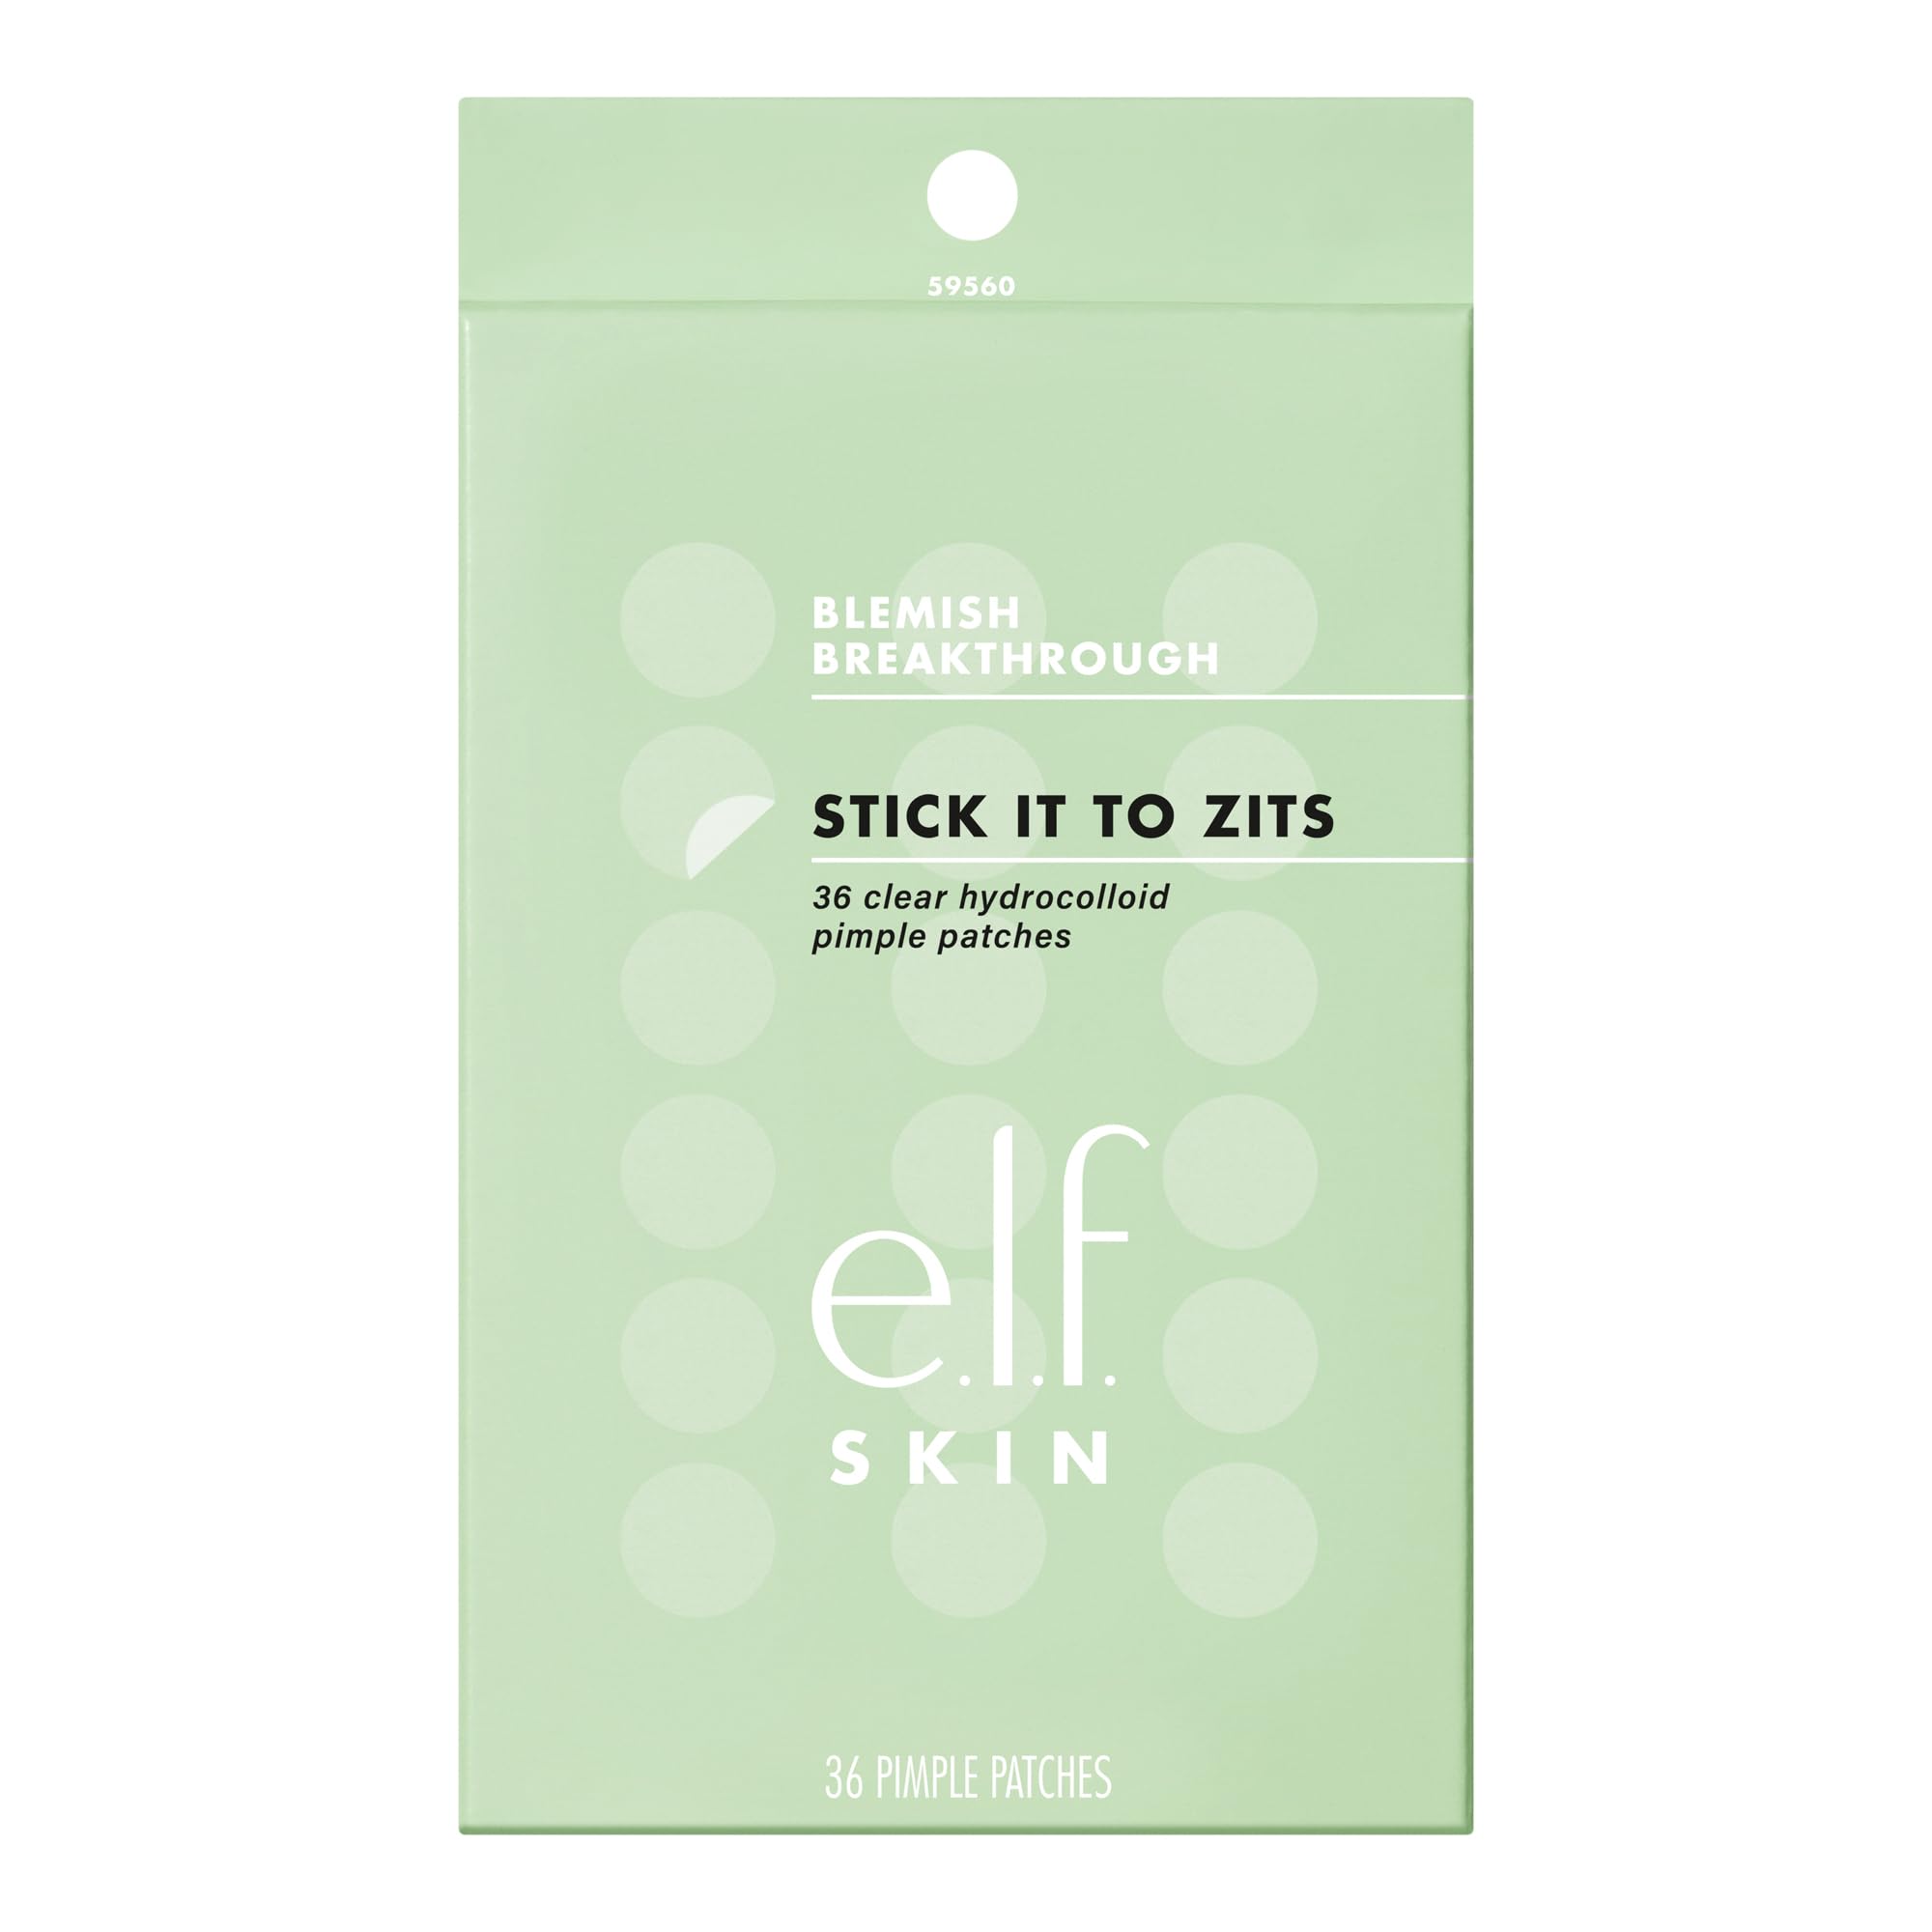 e.l.f. SKIN Blemish Breakthrough Stick It To Zits Pimple Patches, Helps Reduce The Look of Blemishes & Heal, Vegan & Cruelty-free, 36 Patches